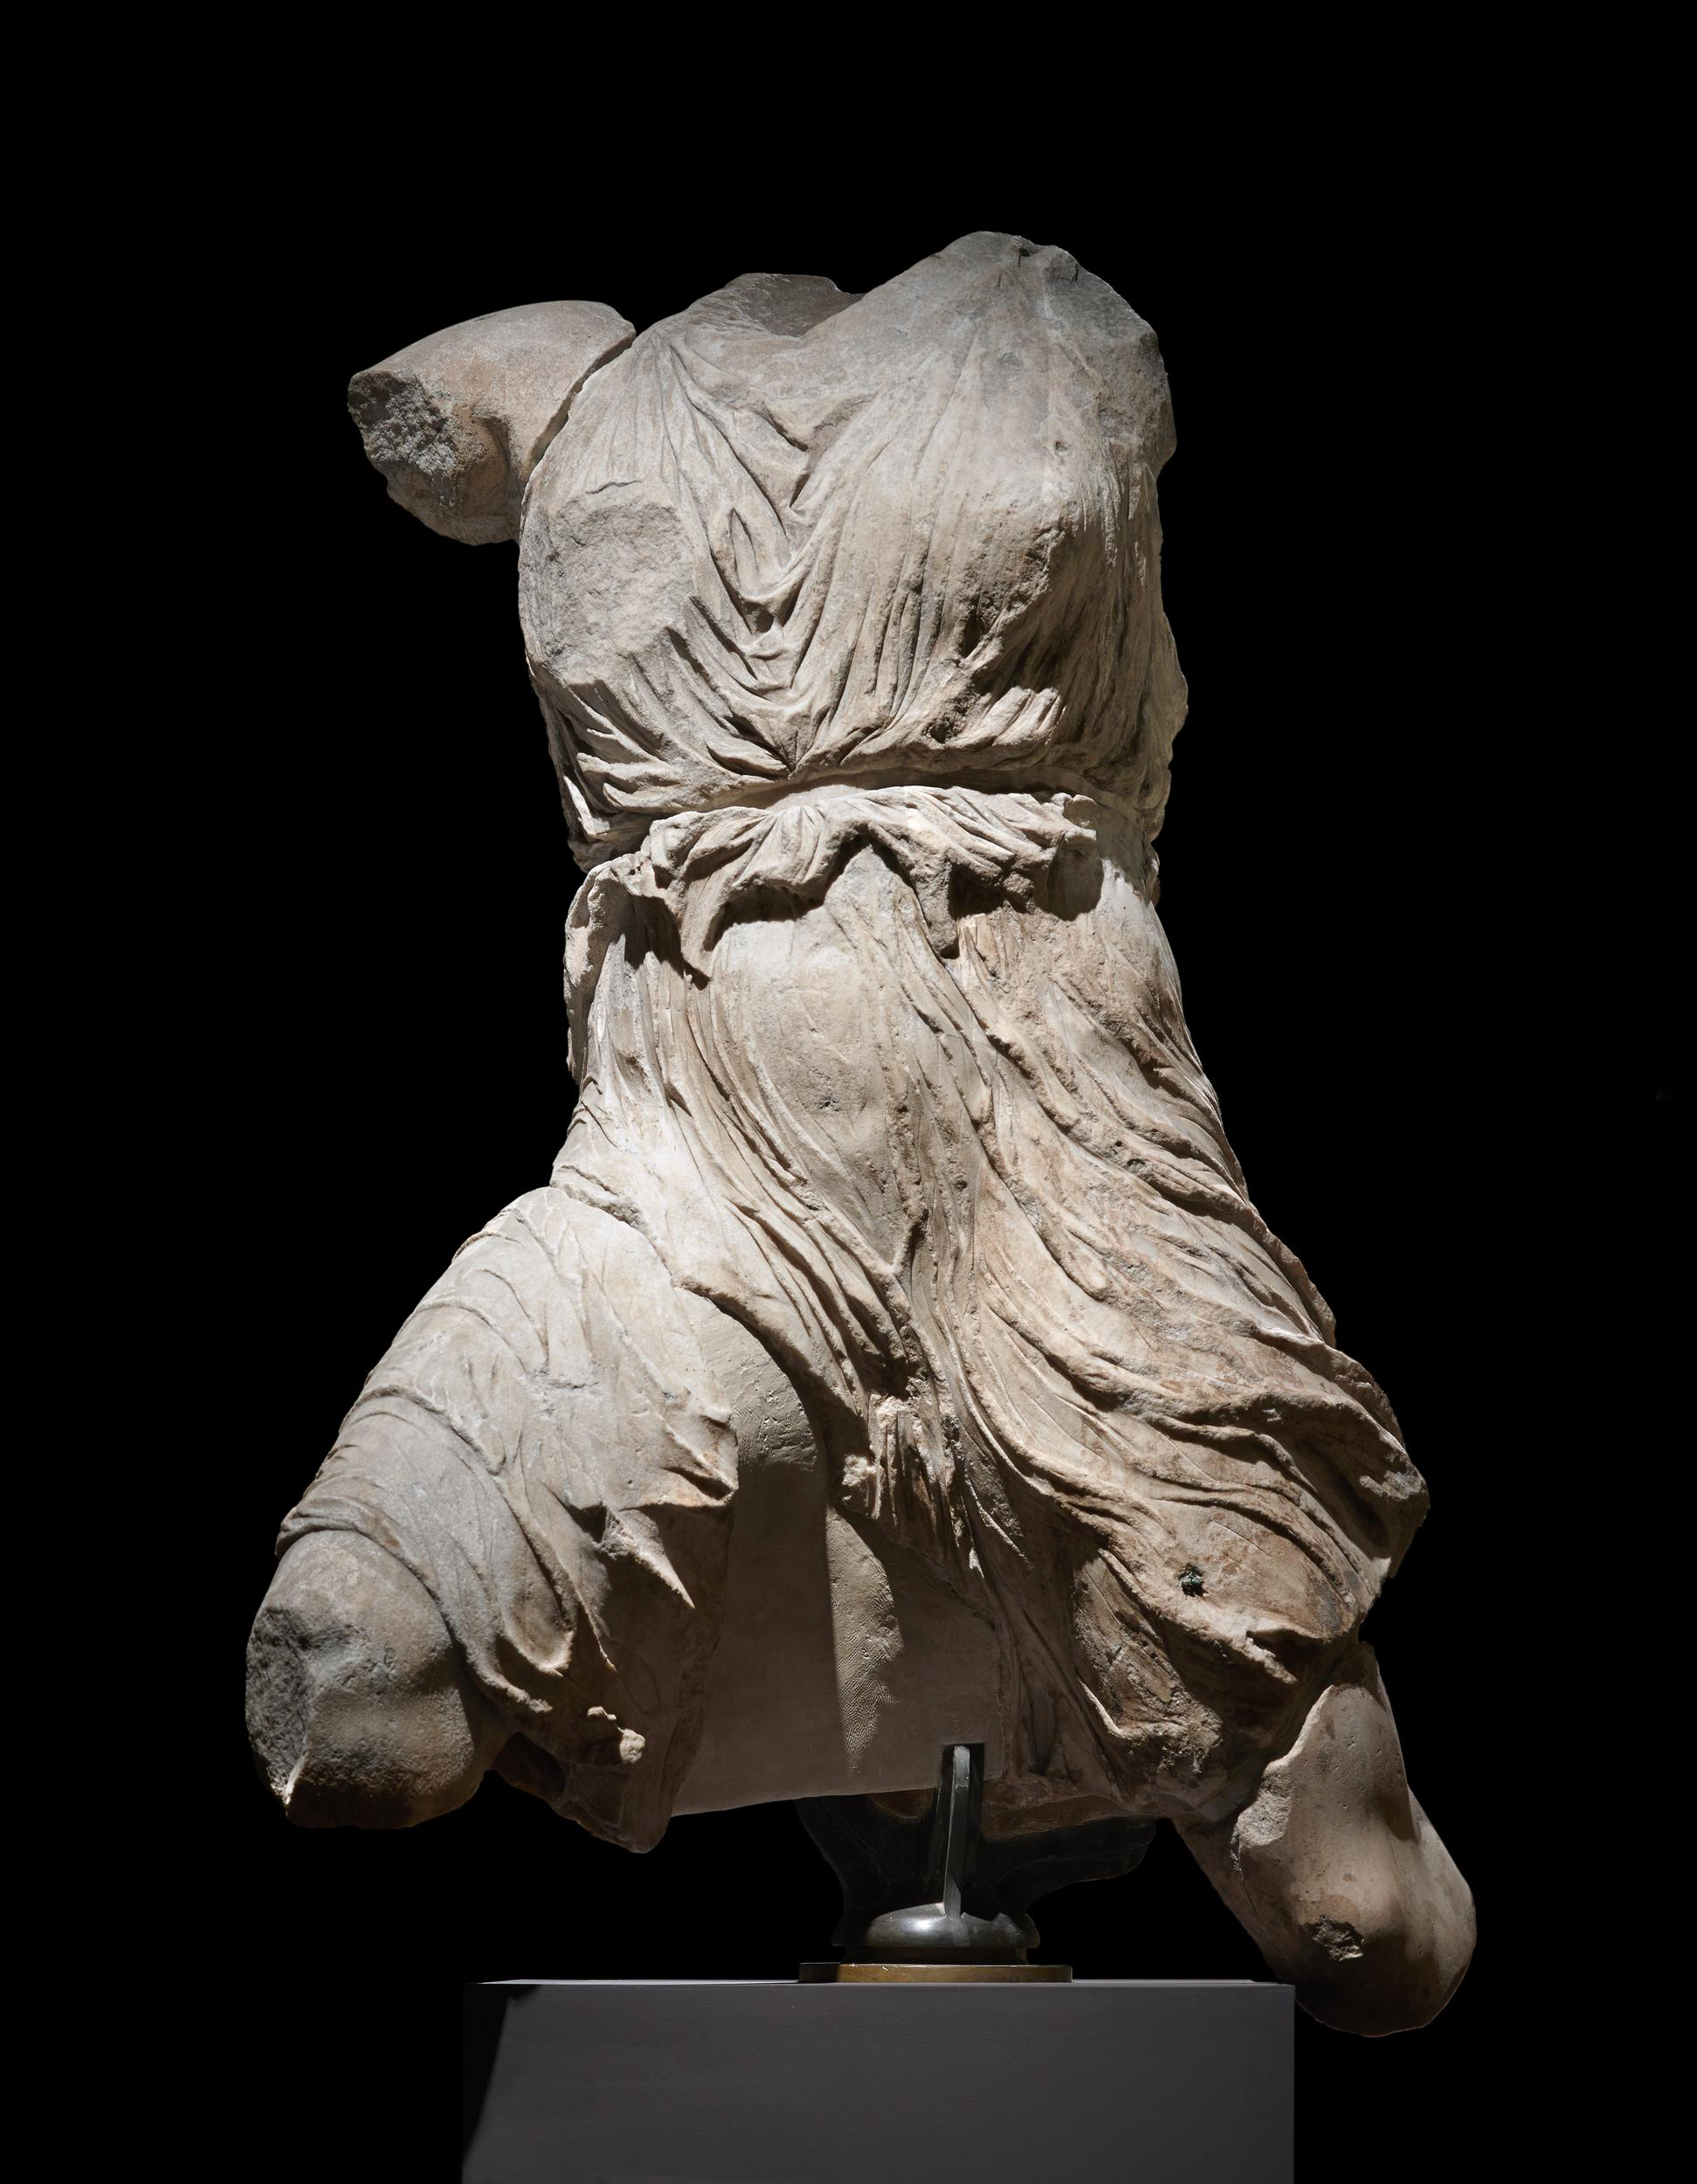 Zeus God from Olympia wall relief plaque sculpture